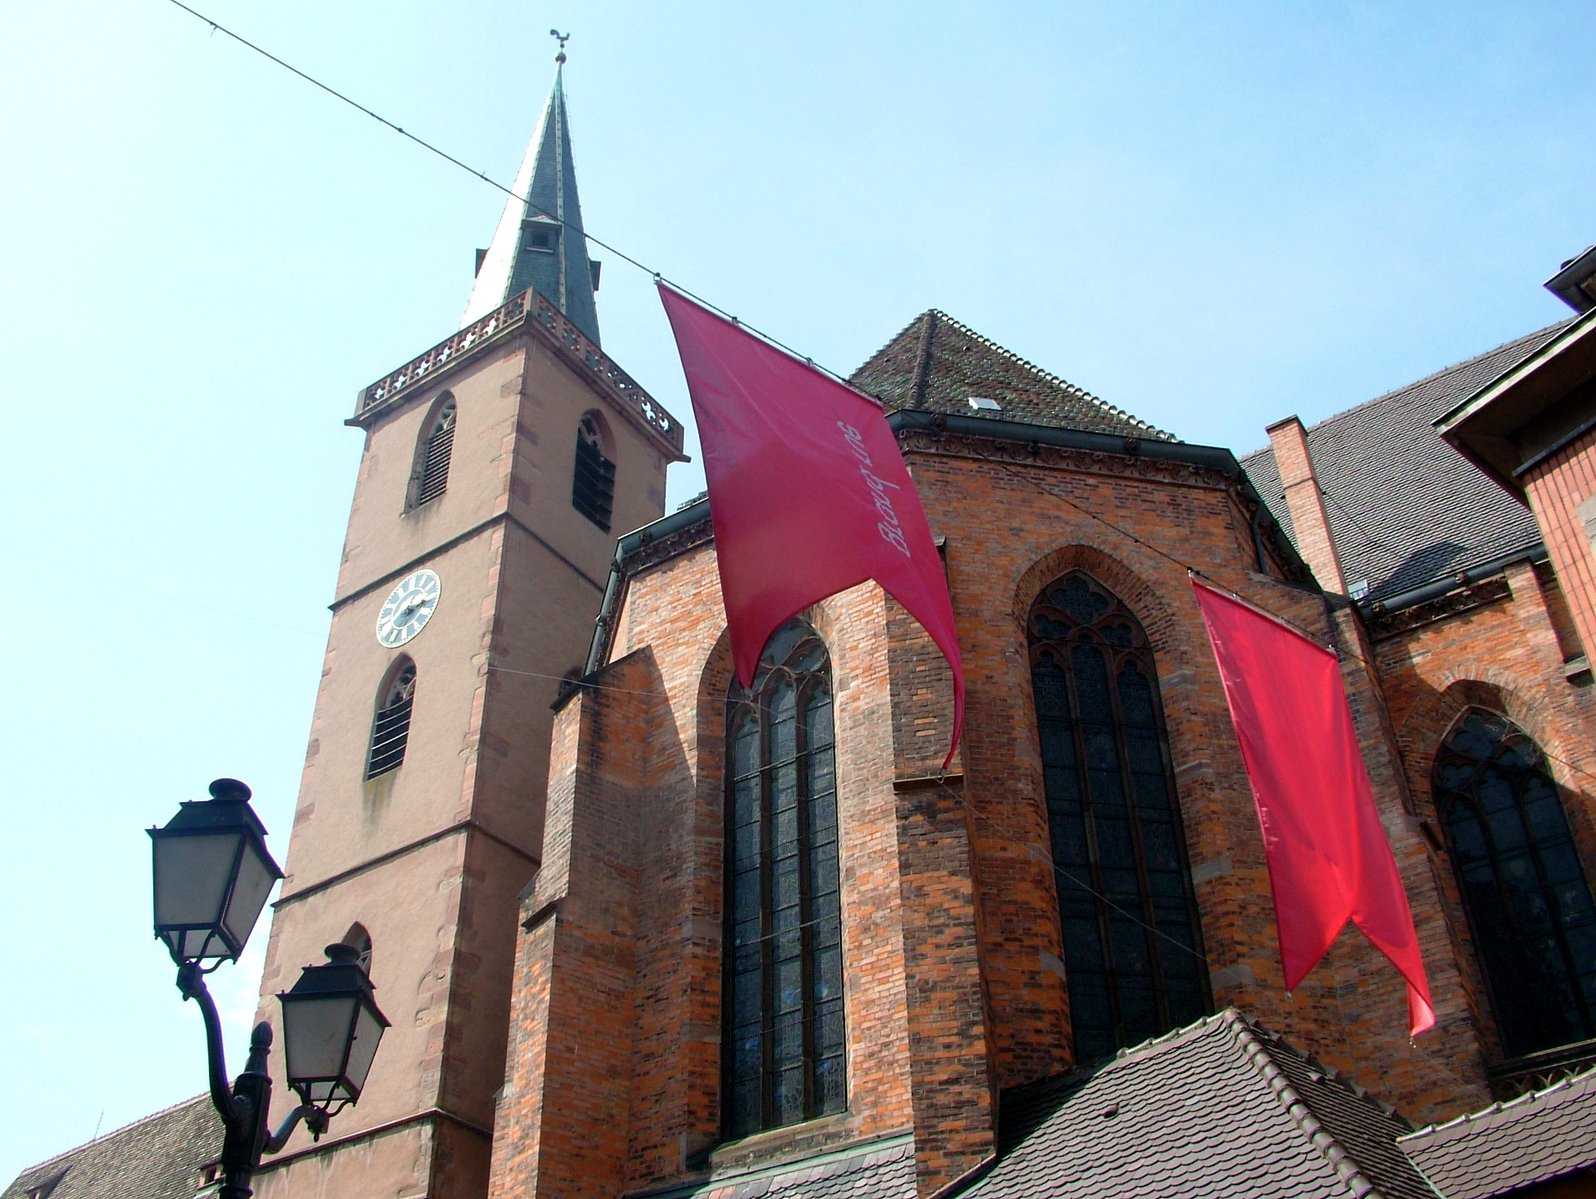 an architectural structure with red banners hanging outside